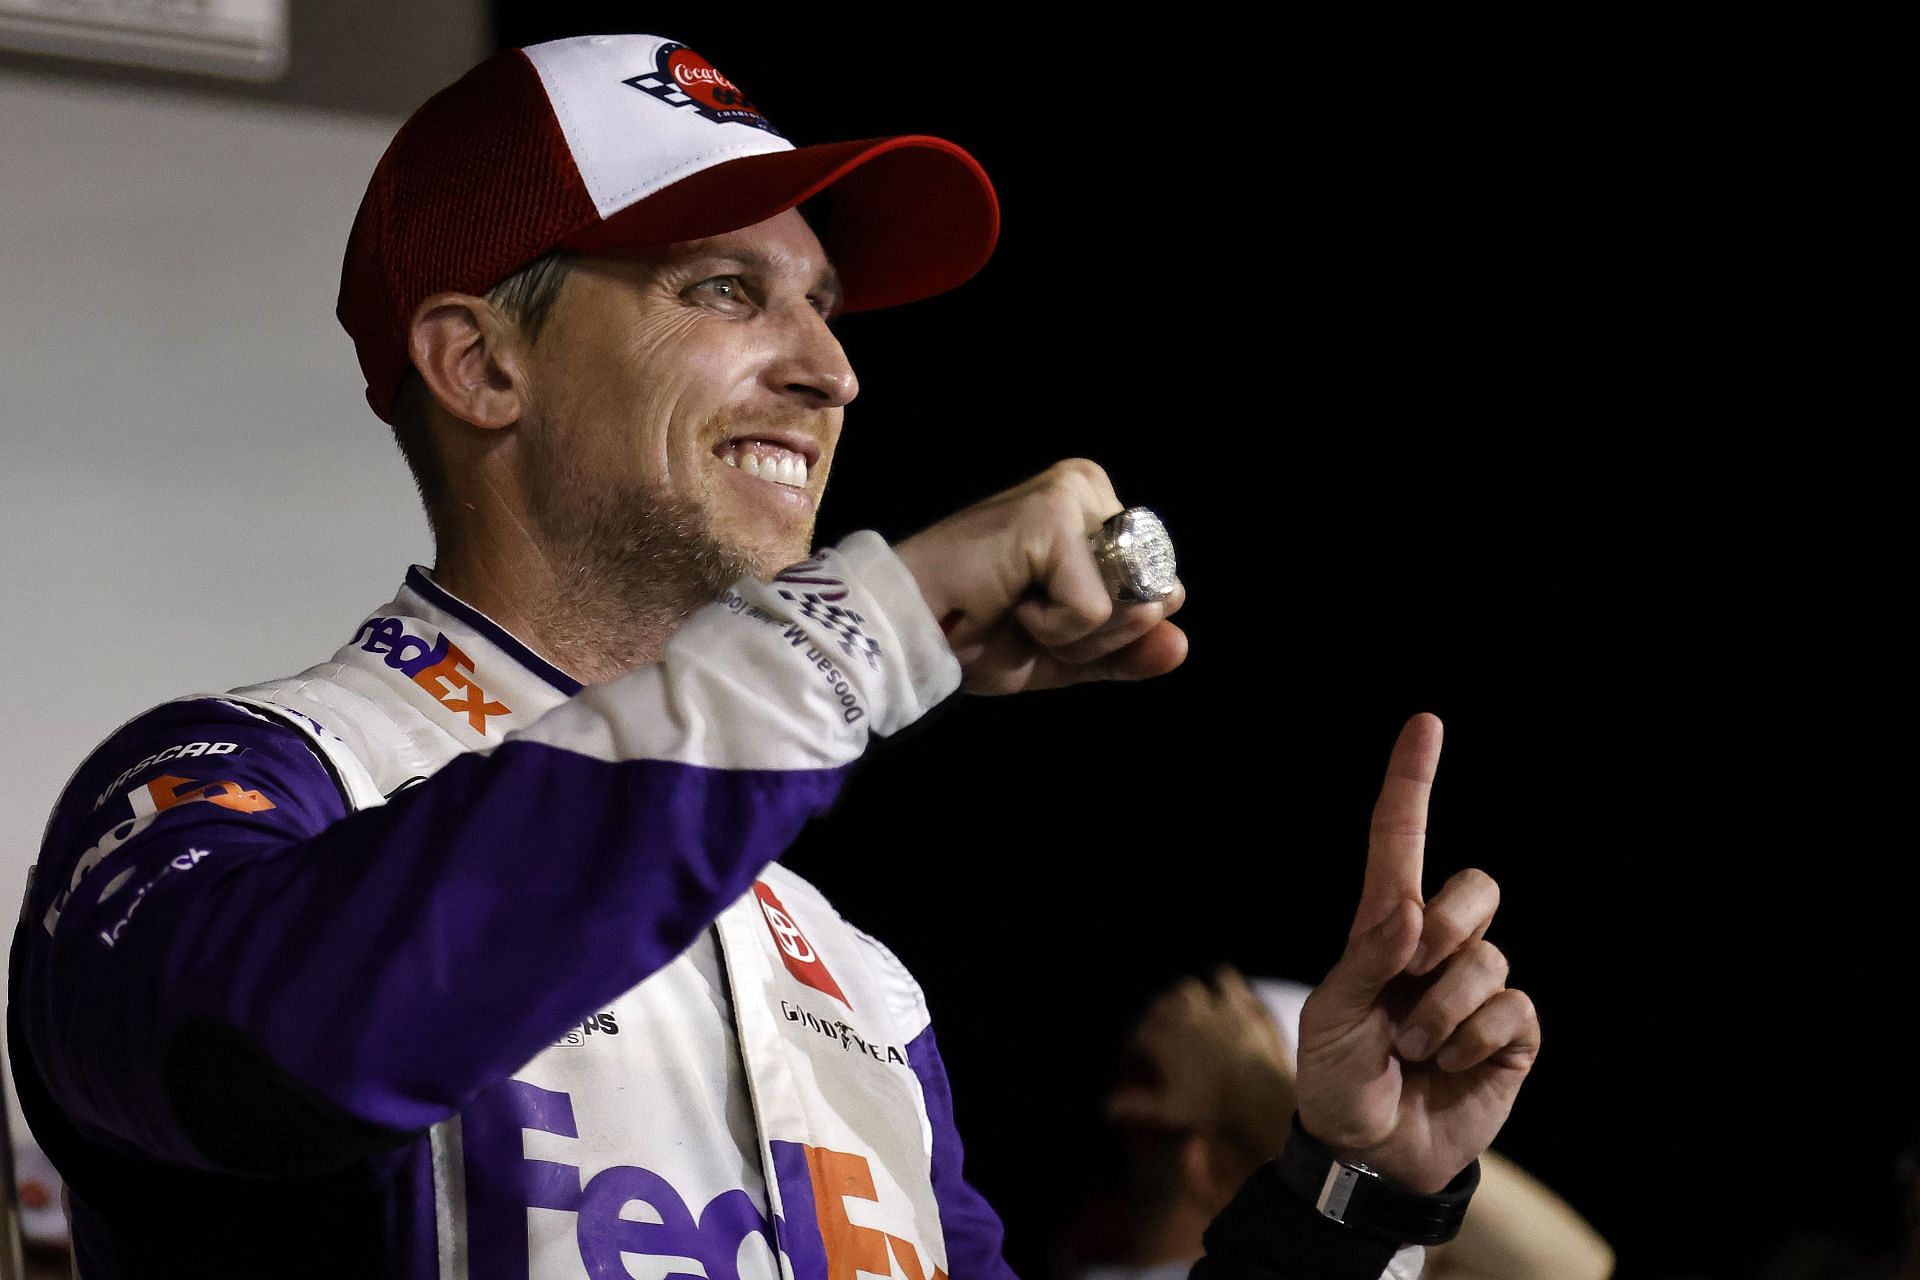 Denny Hamlin displays his Coca-Cola 600 ring in victory lane after winning the NASCAR Cup Series Coca-Cola 600 at Charlotte Motor Speedway